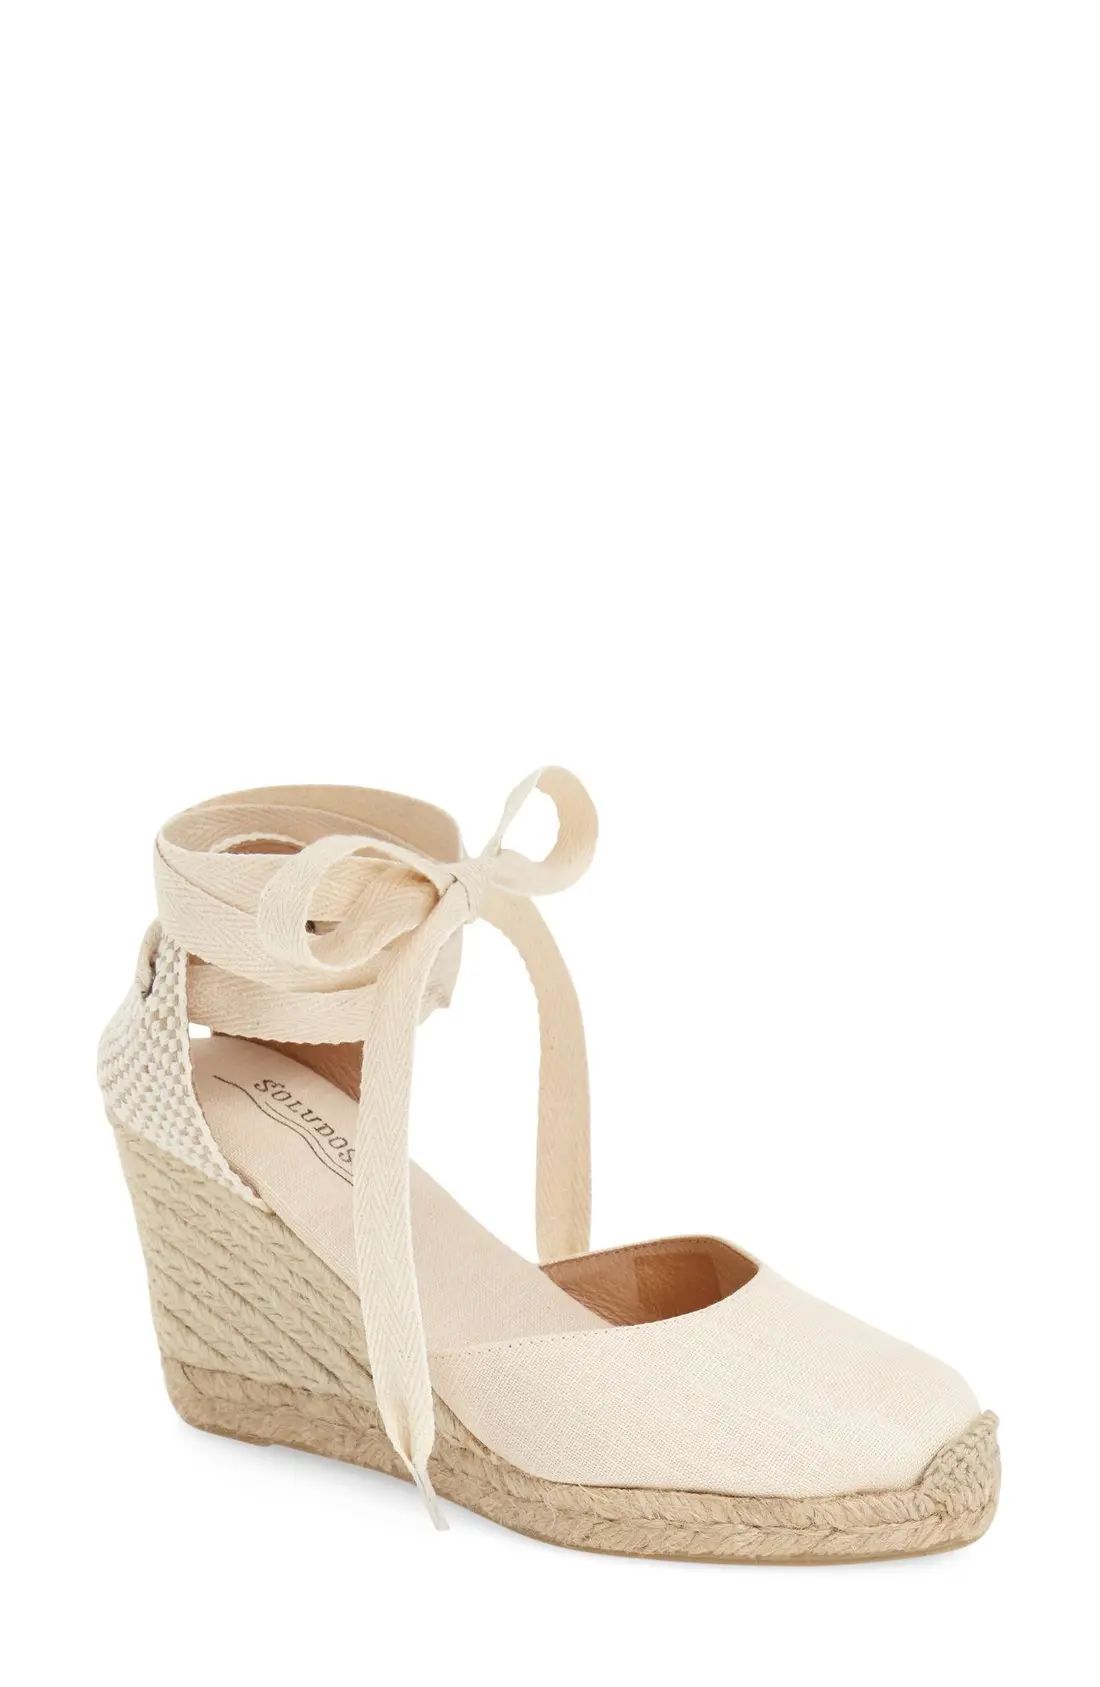 Women's Soludos Wedge Lace-Up Espadrille Sandal, Size 10 M - Beige | Nordstrom